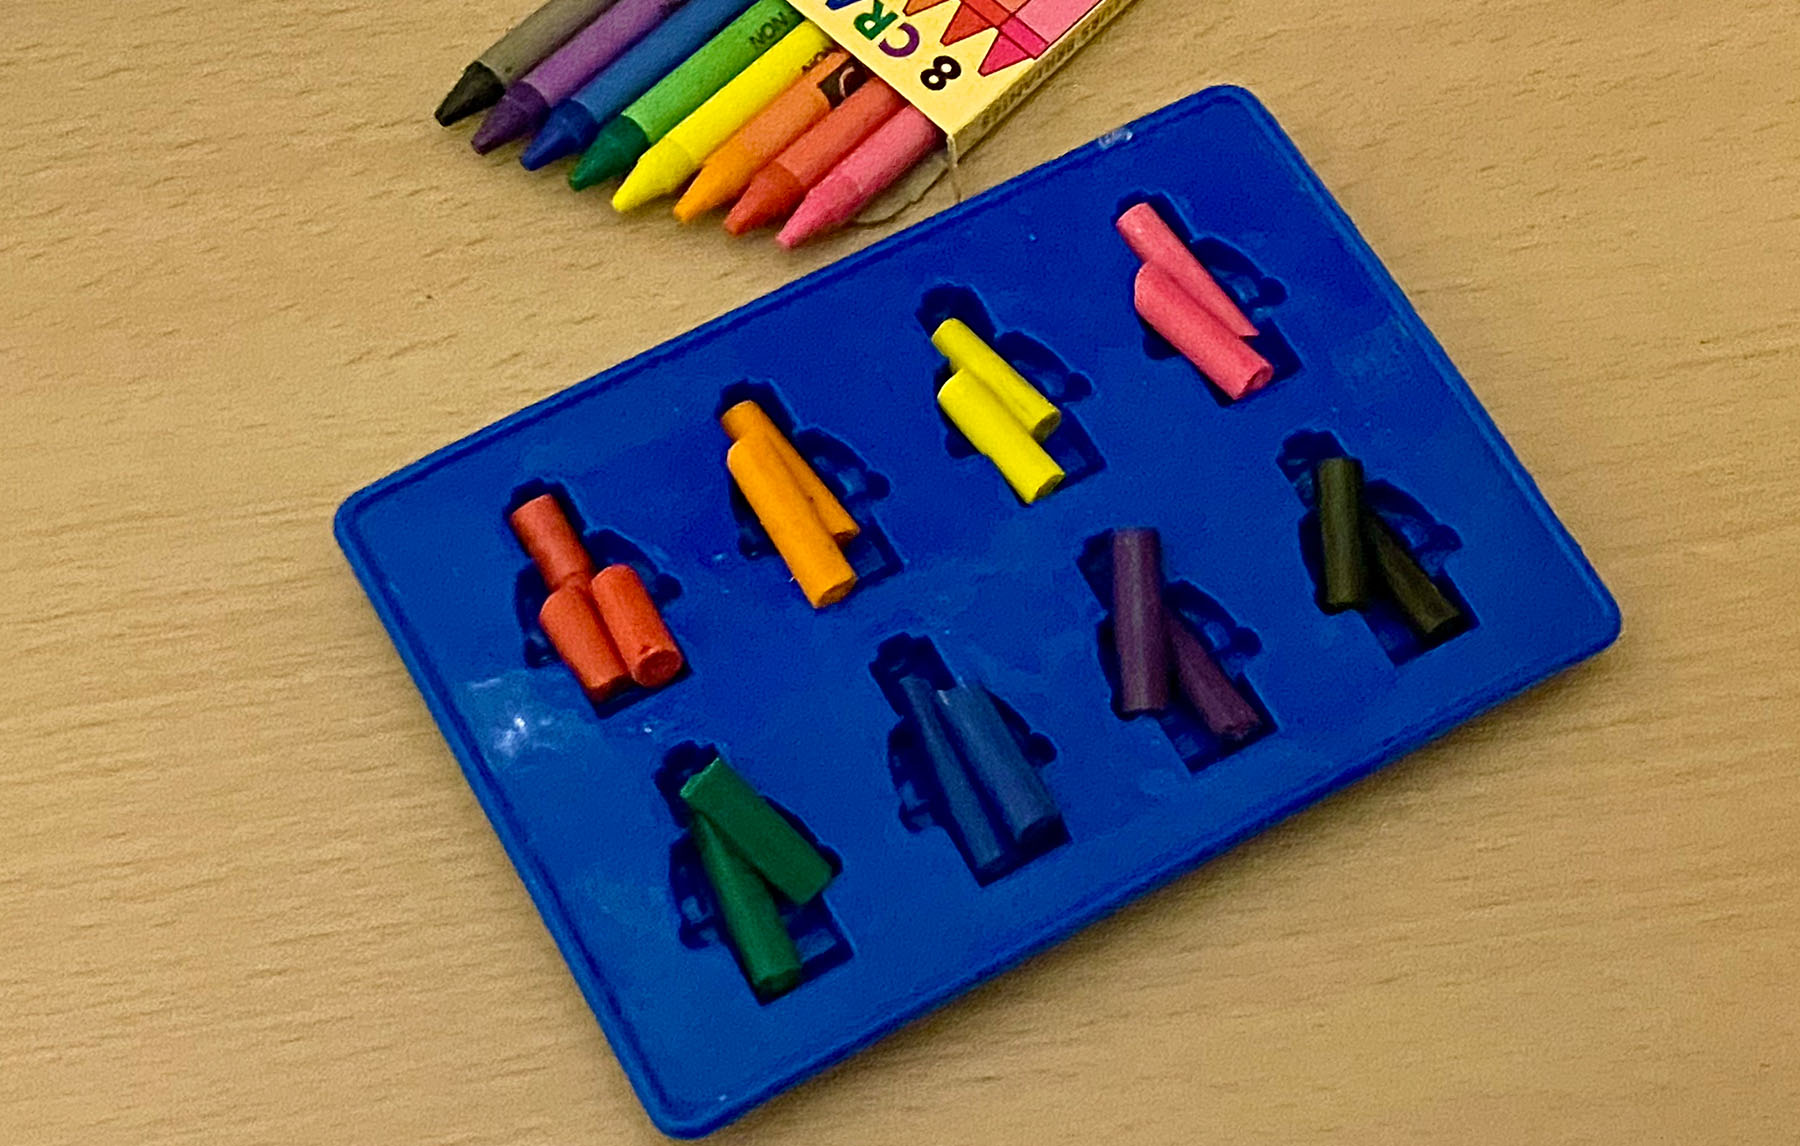 Simple homemade crayons – lego minifigures